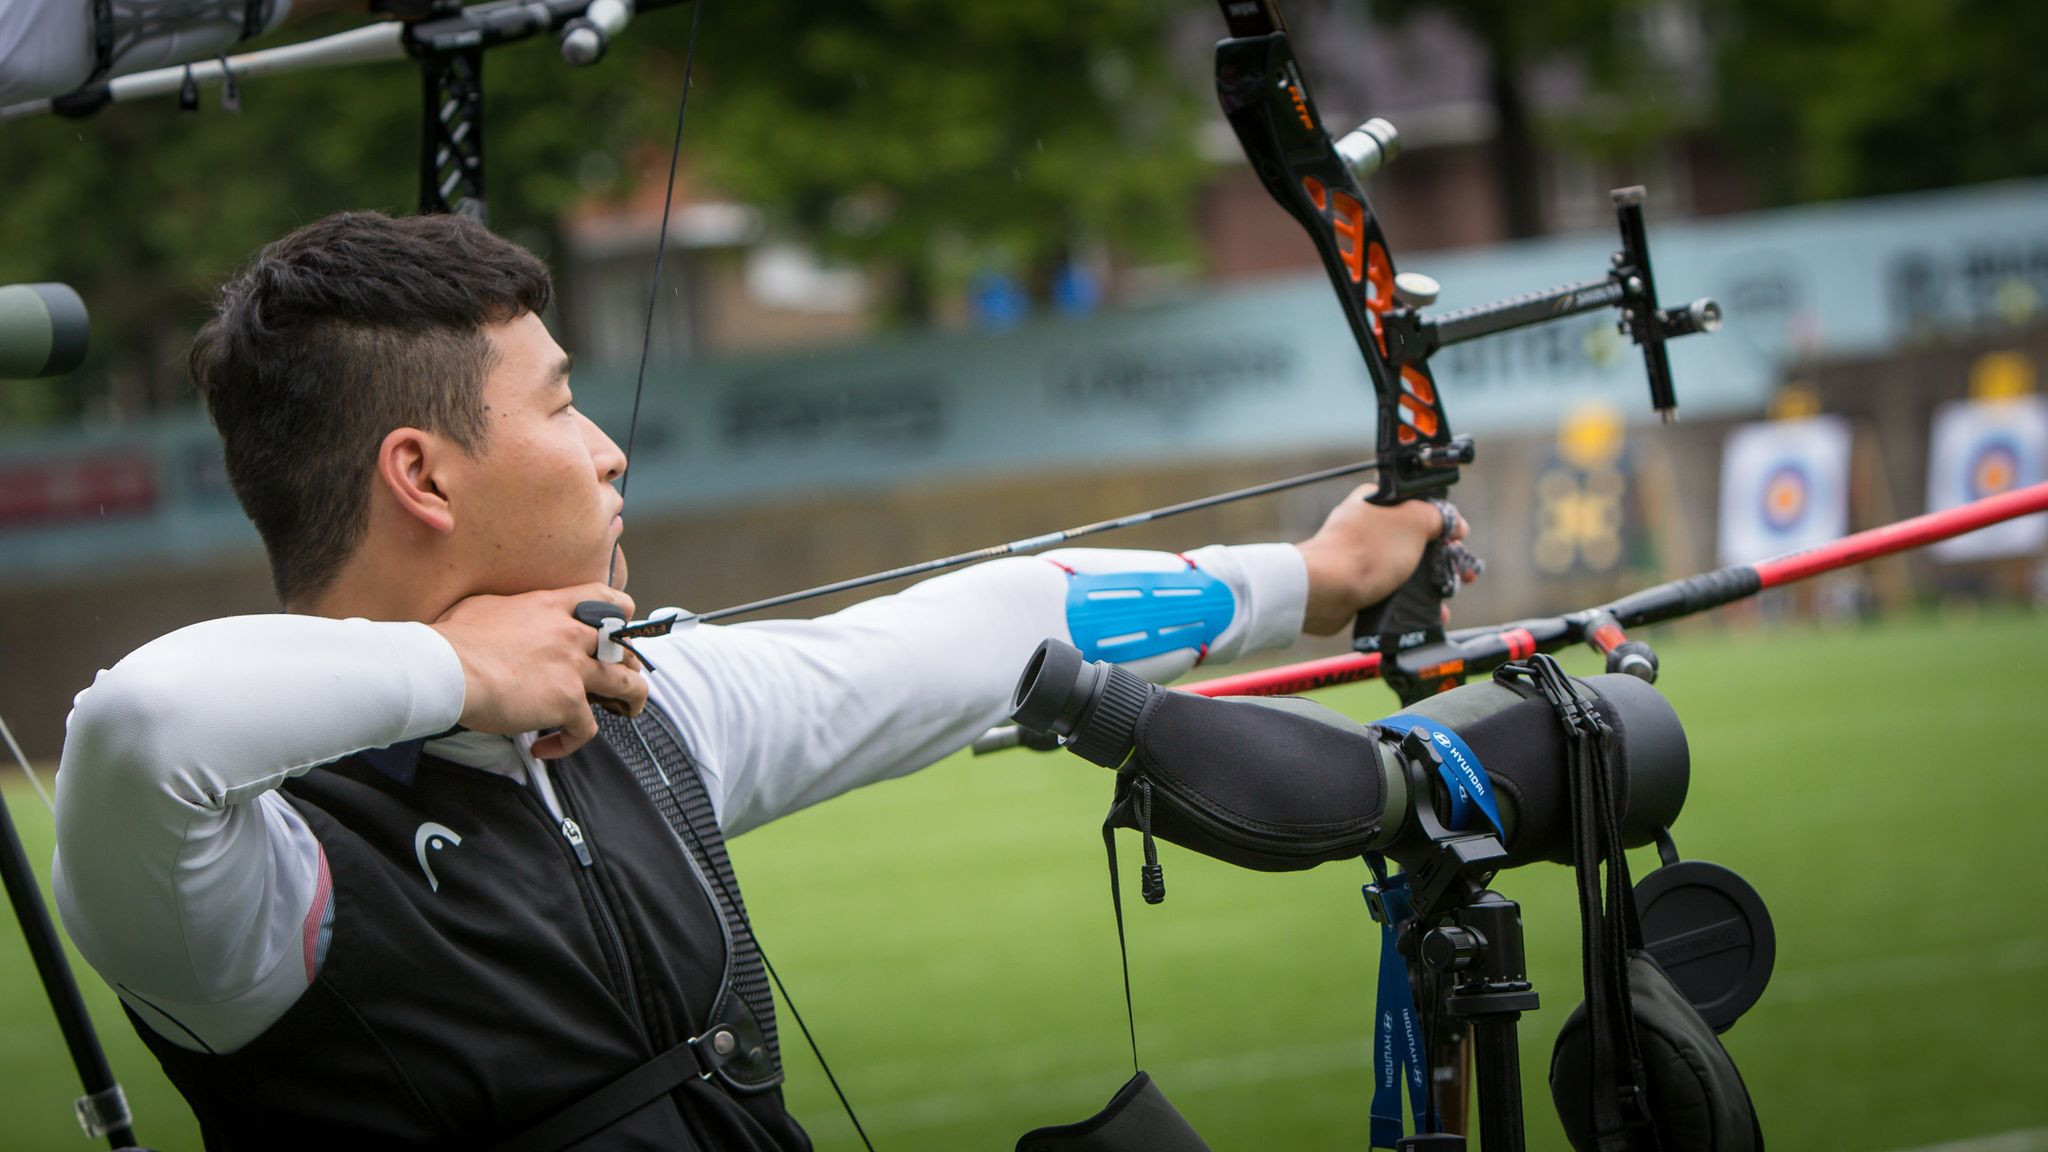 South Korea's Kim Min Sun was one of a number of world record breakers on the opening day of the World Archery Para Sport Championships in The Netherlands ©World Archery